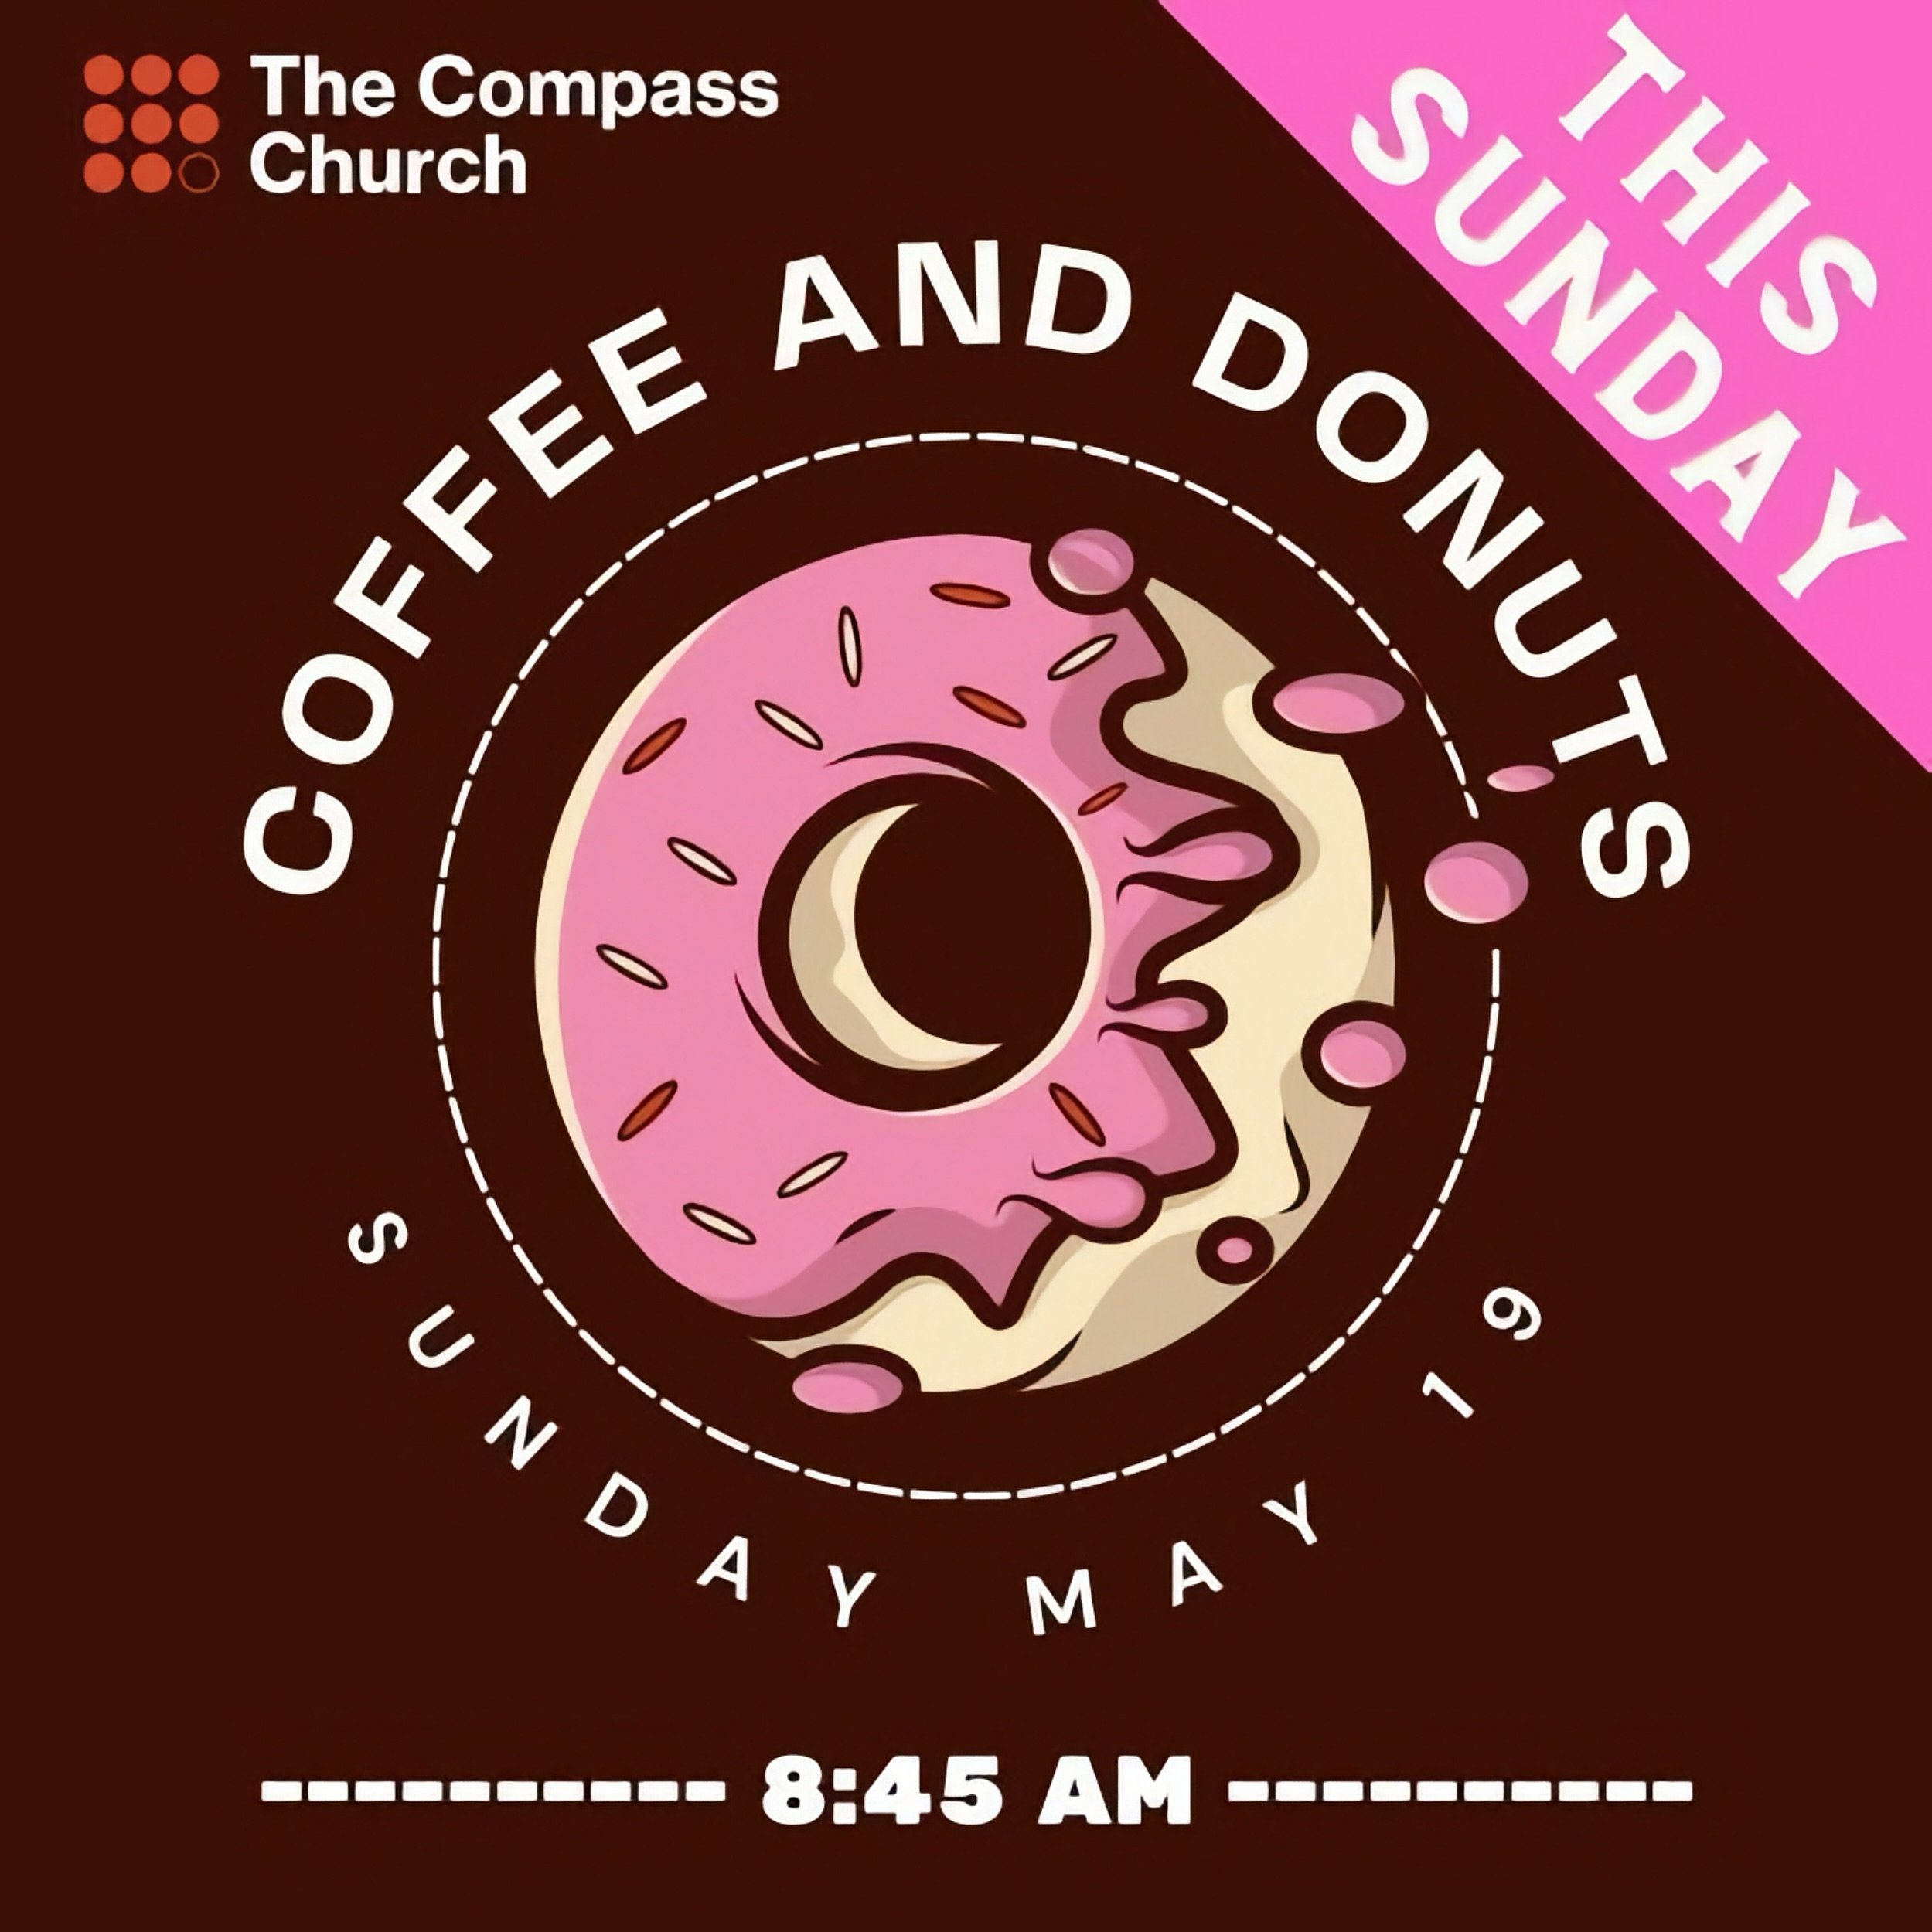 Come join us before tomorrow&rsquo;s Church Gathering for some coffee ☕️ and donuts 🍩 at 8:45am!

We look forward to seeing you tomorrow morning.

#CompassRegina #Regina #ReginaSK #YQR